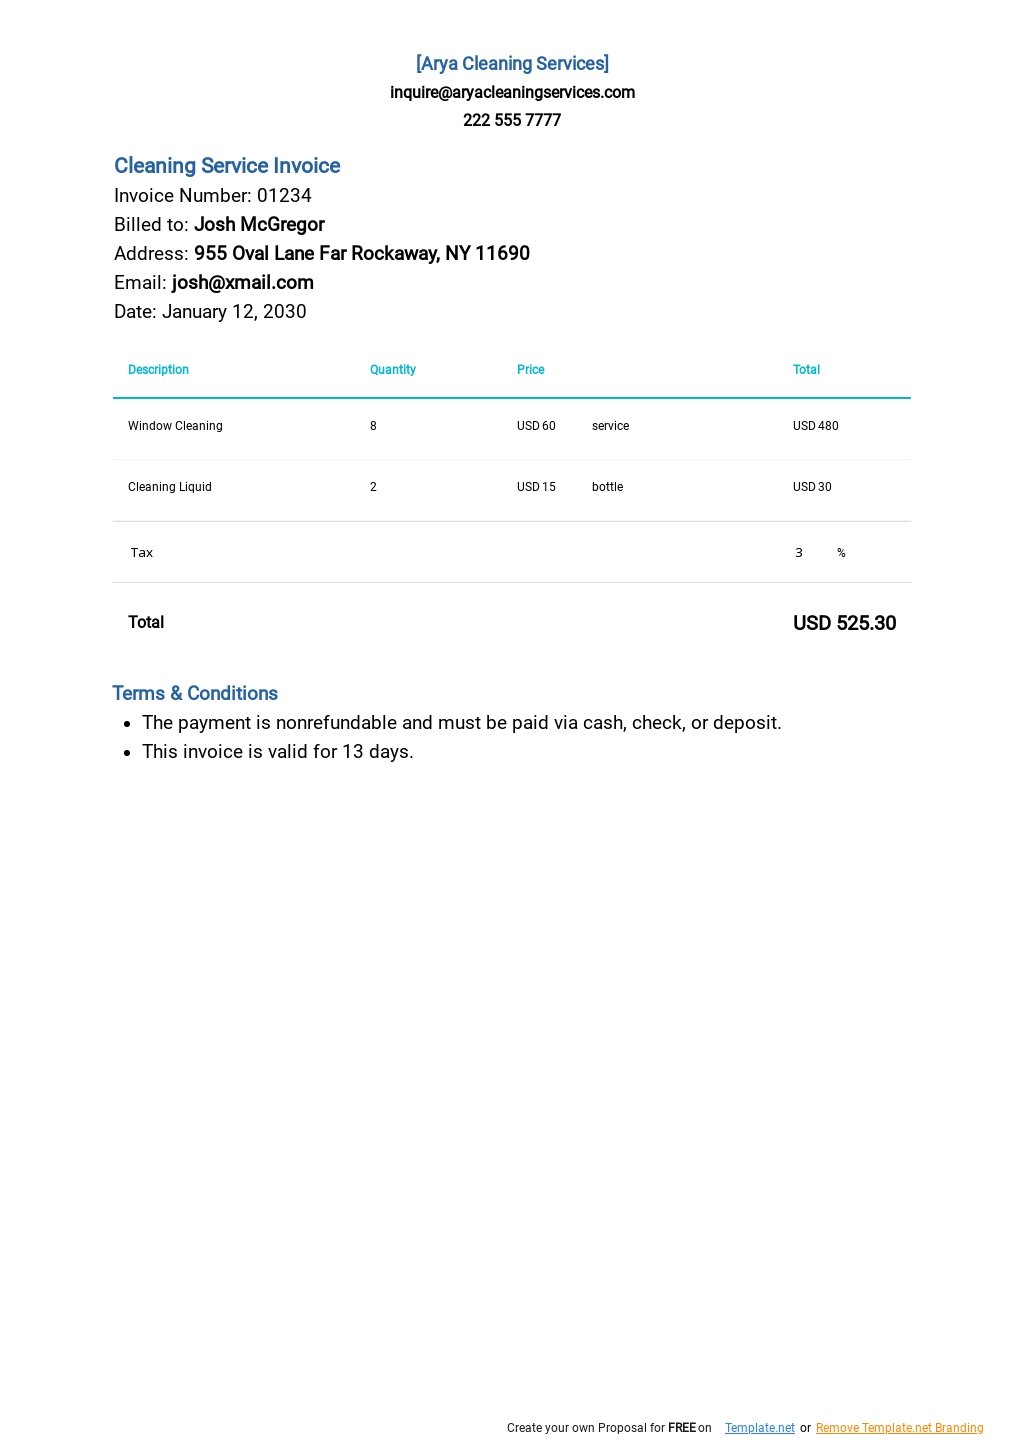 Cleaning Service Invoice Template - Google Docs, Google Sheets With Regard To House Cleaning Invoice Template Free